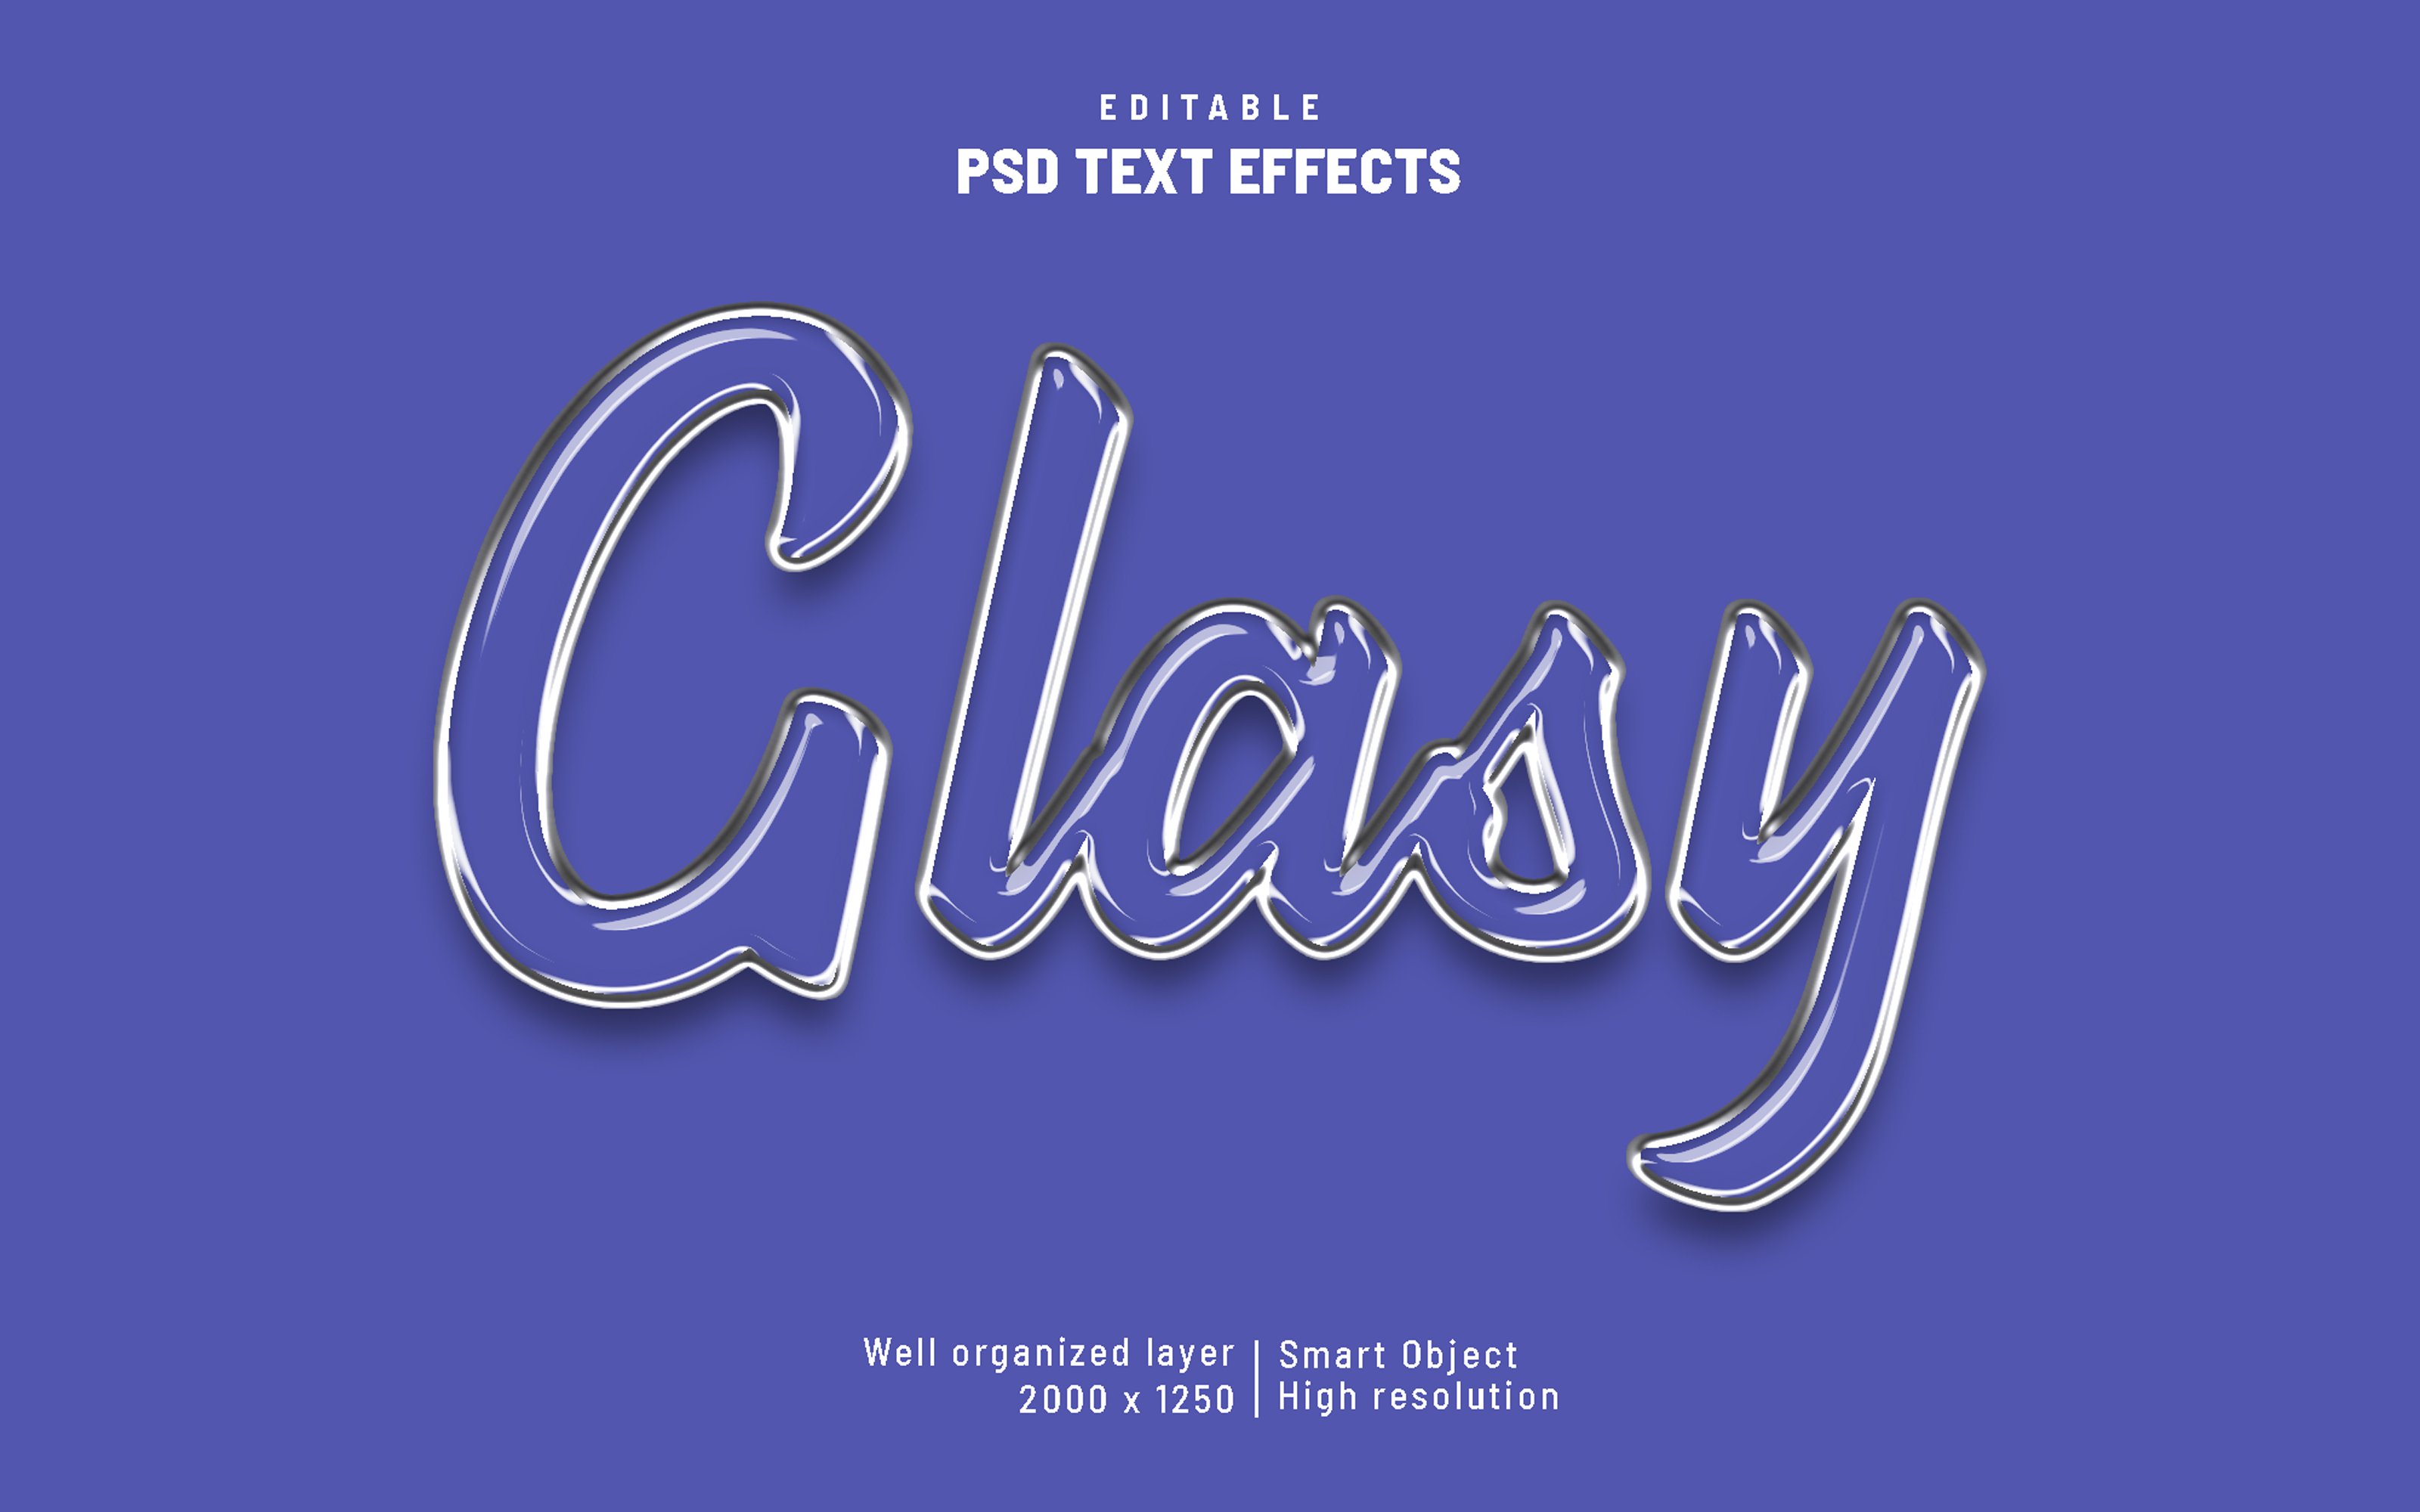 Glass glasy editable text effectcover image.